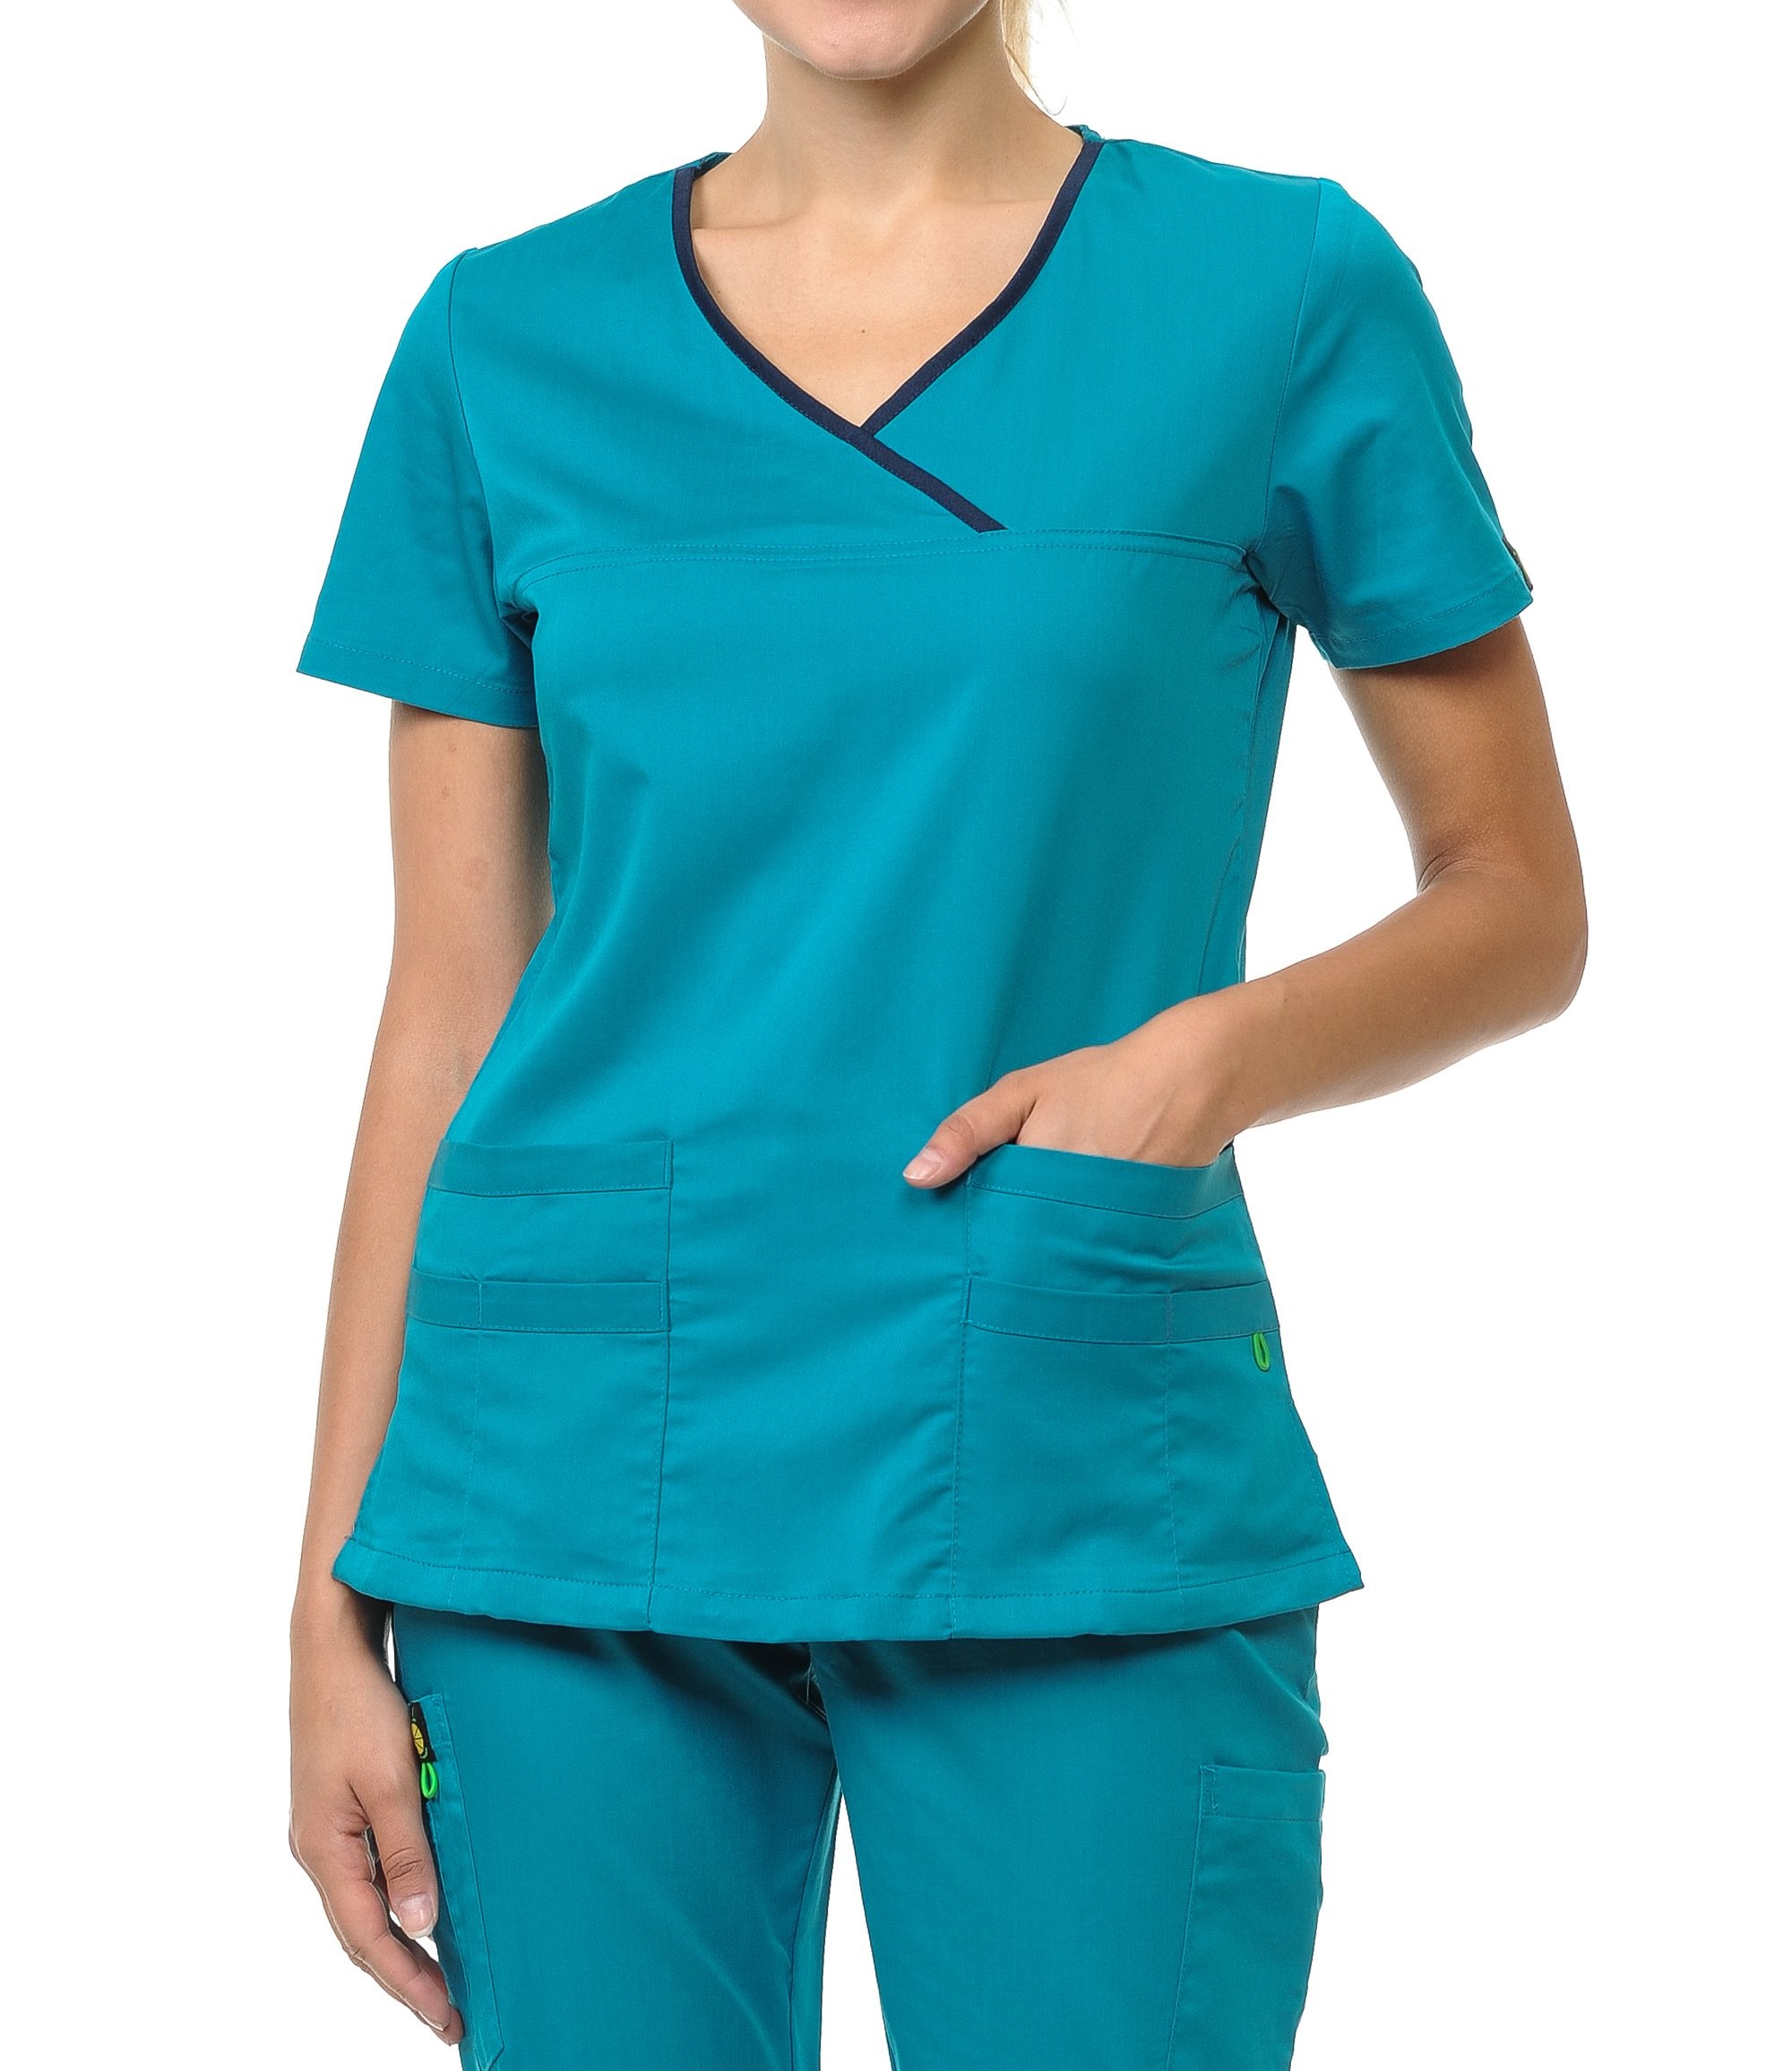 91% polyester 9% spandex Woman Medical Uniform Scrubs Top, Y-Neck Top Moisture wicking dry fast